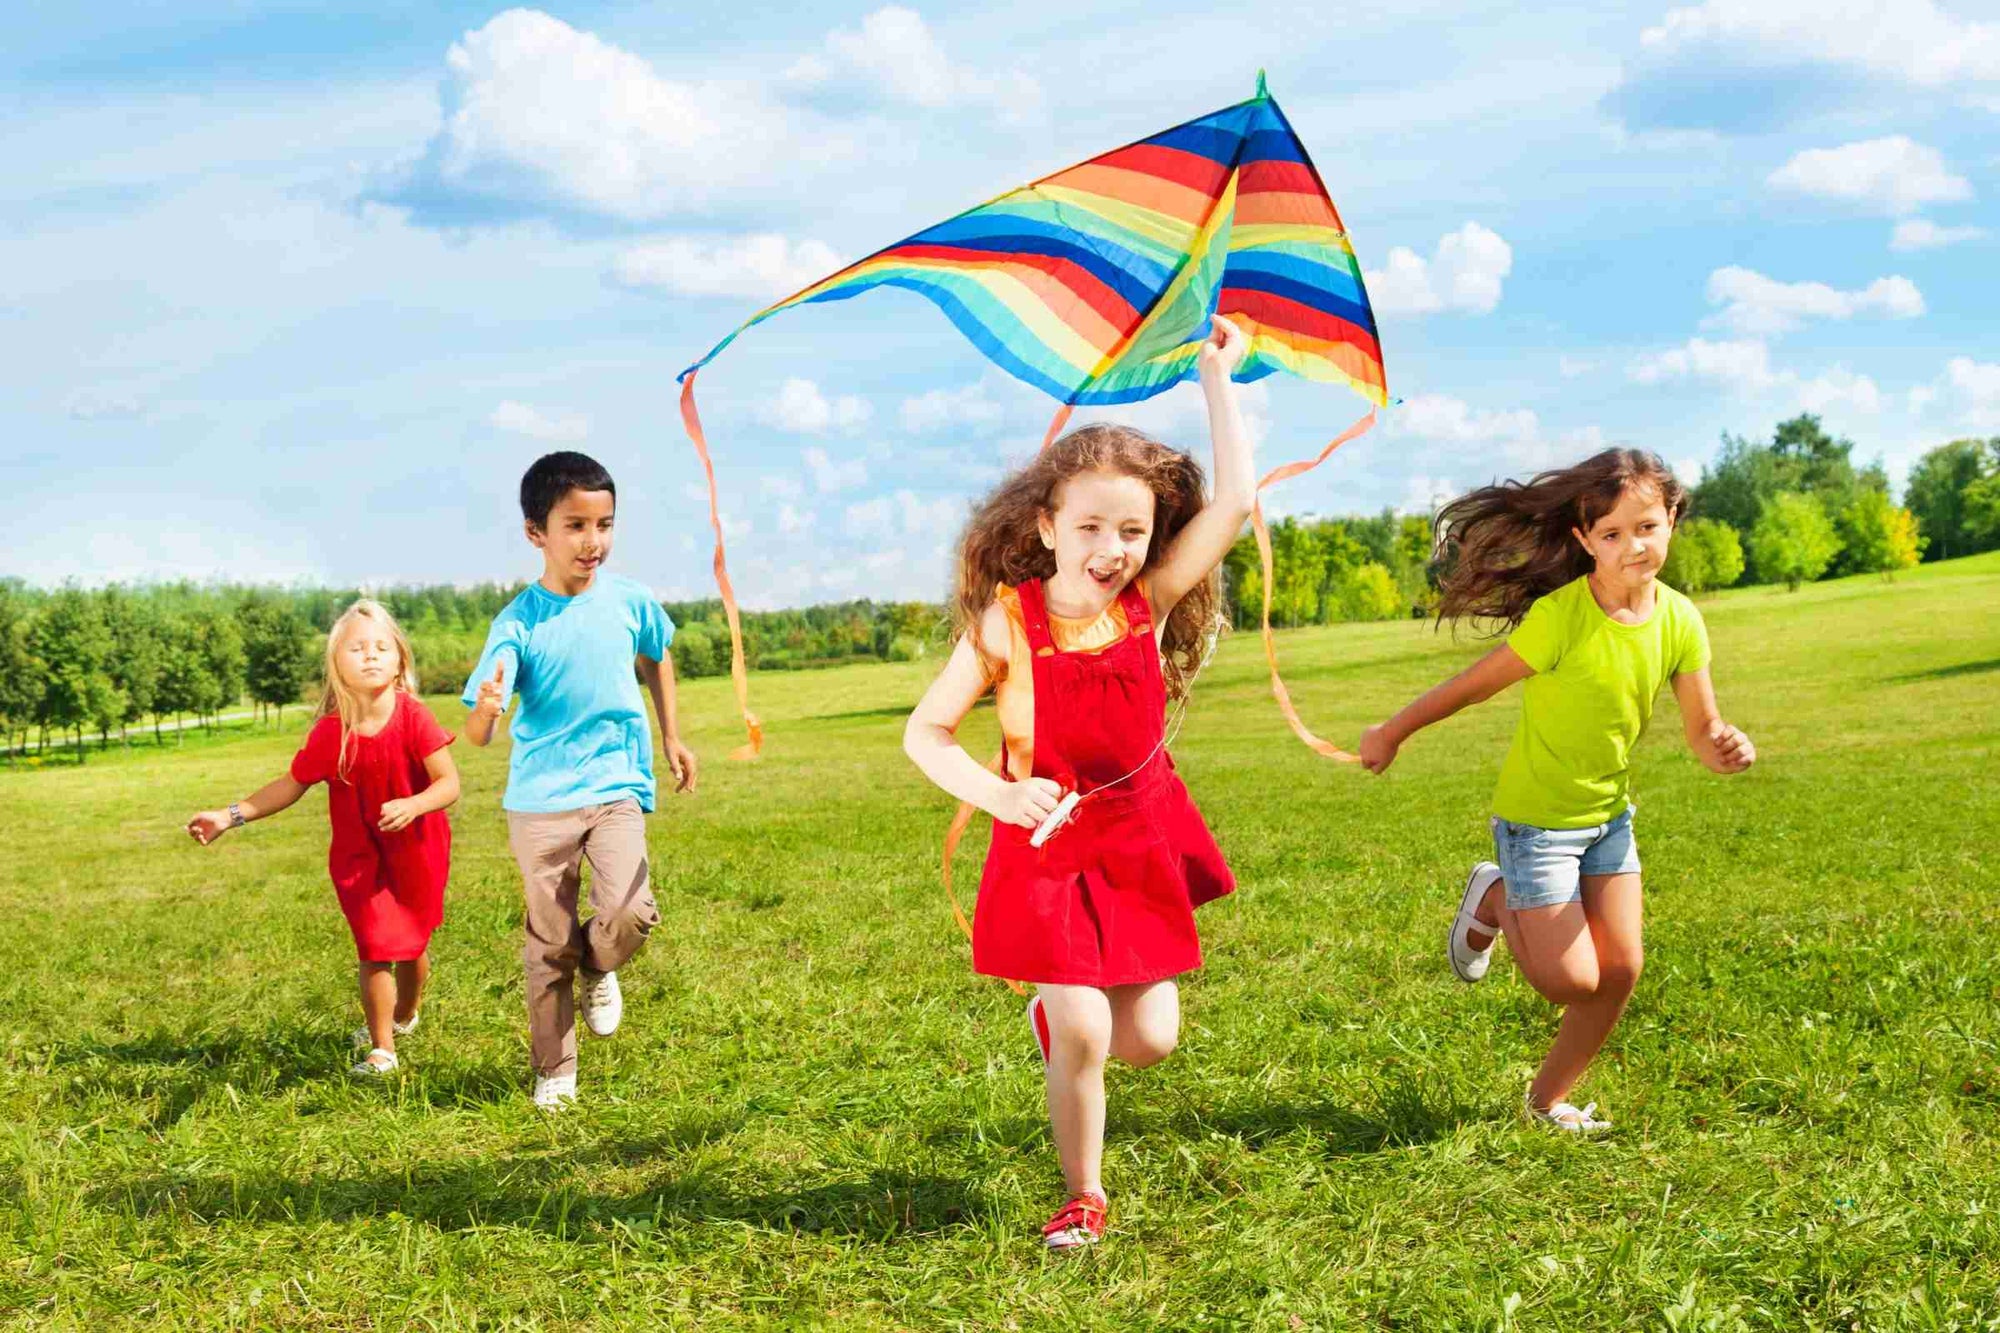 Colourful photo of children running across a green field with a rainbow kite.